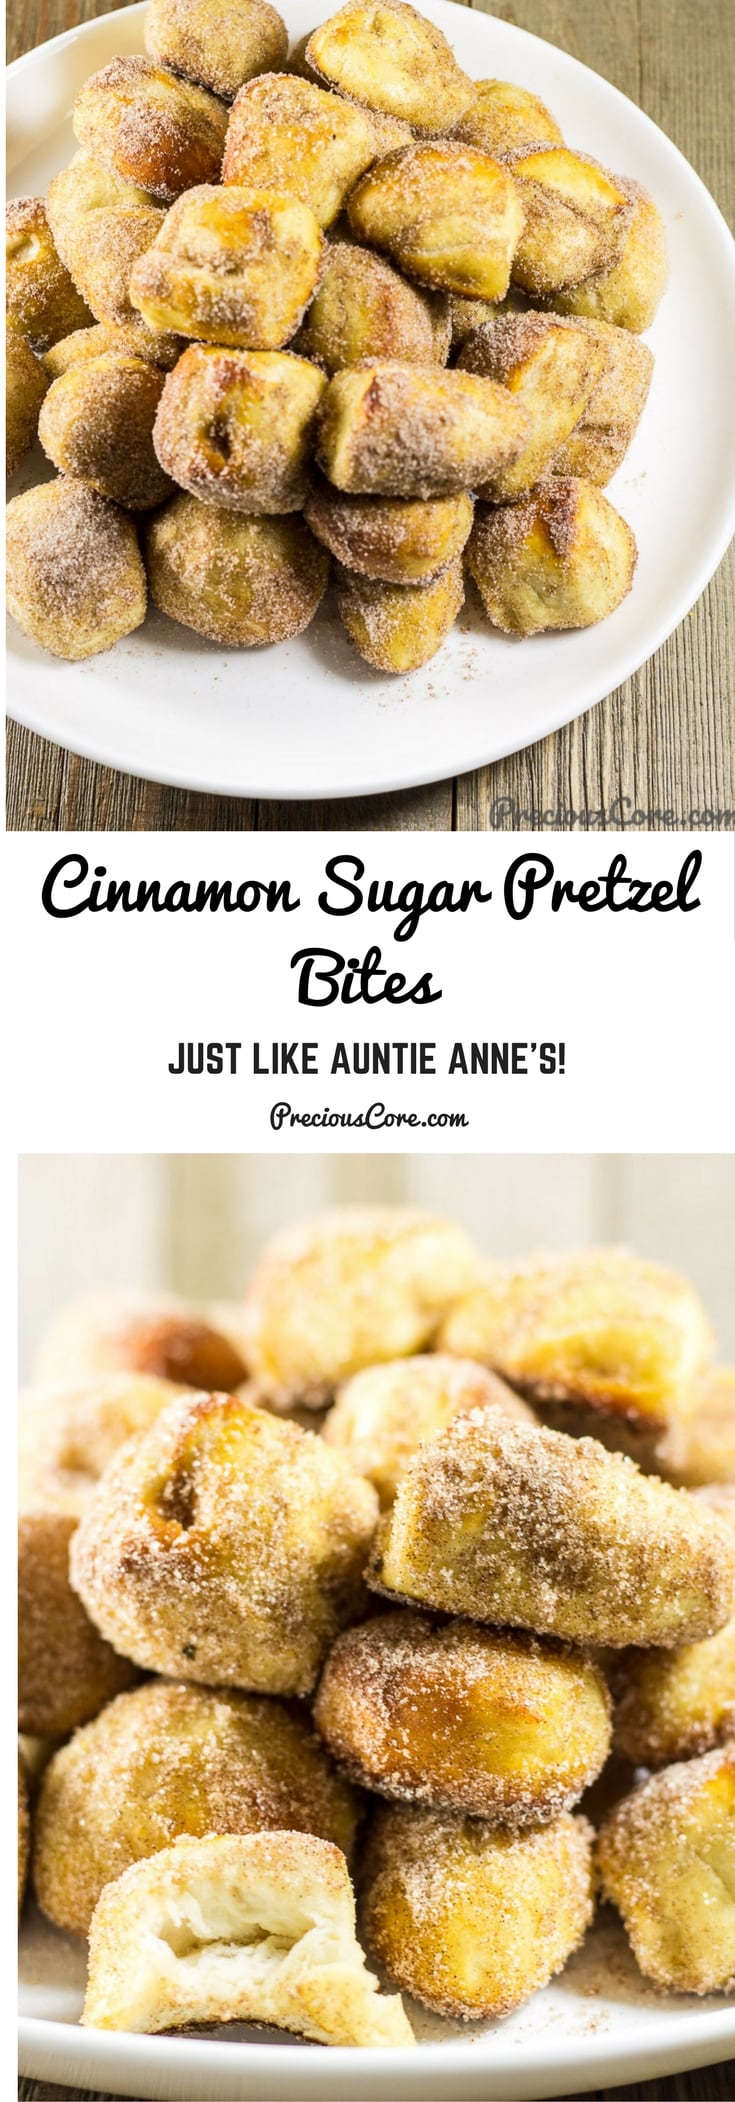 These cinnamon sugar pretzel bites taste just like the ones at the mall. Soft and pillowy on the outside and coated with a heavenly cinnamon sugar mixture. This recipe is perfect for game day or a homemade treat. Get the recipe on preciouscore.com. #homemade #pretzelbites #gameday #pastries #copycatrecipes #baking